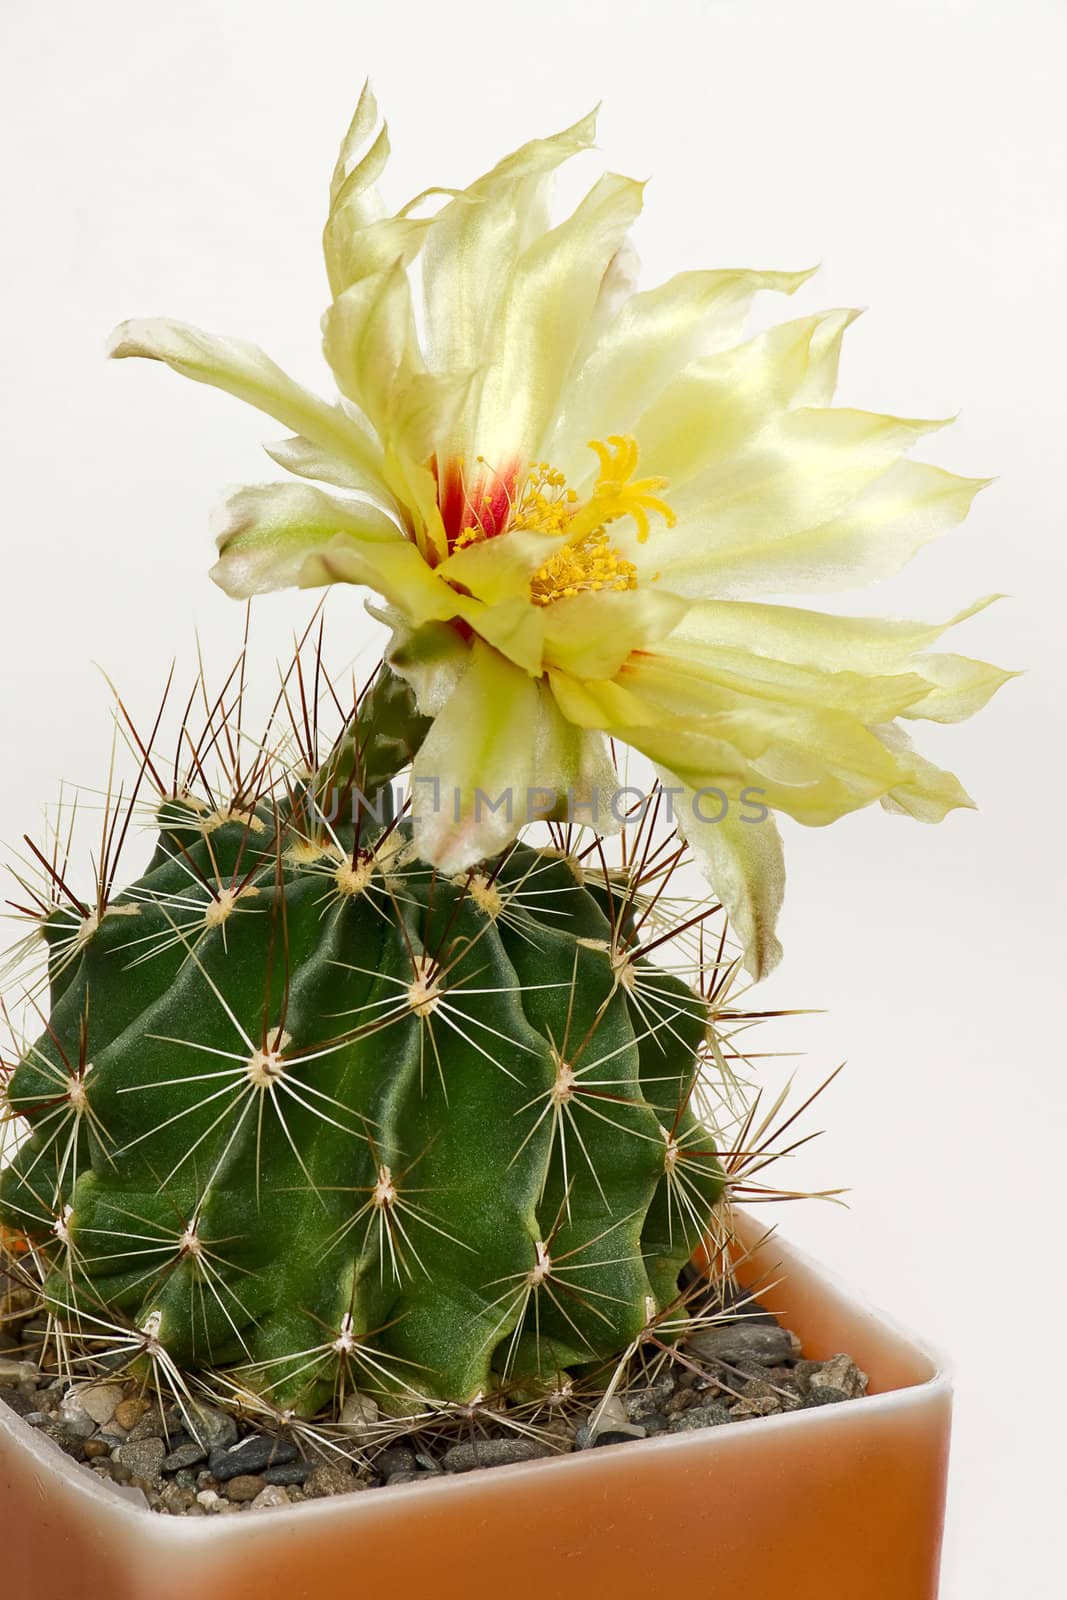 Cactus with blossoms on light background (Notocactus).